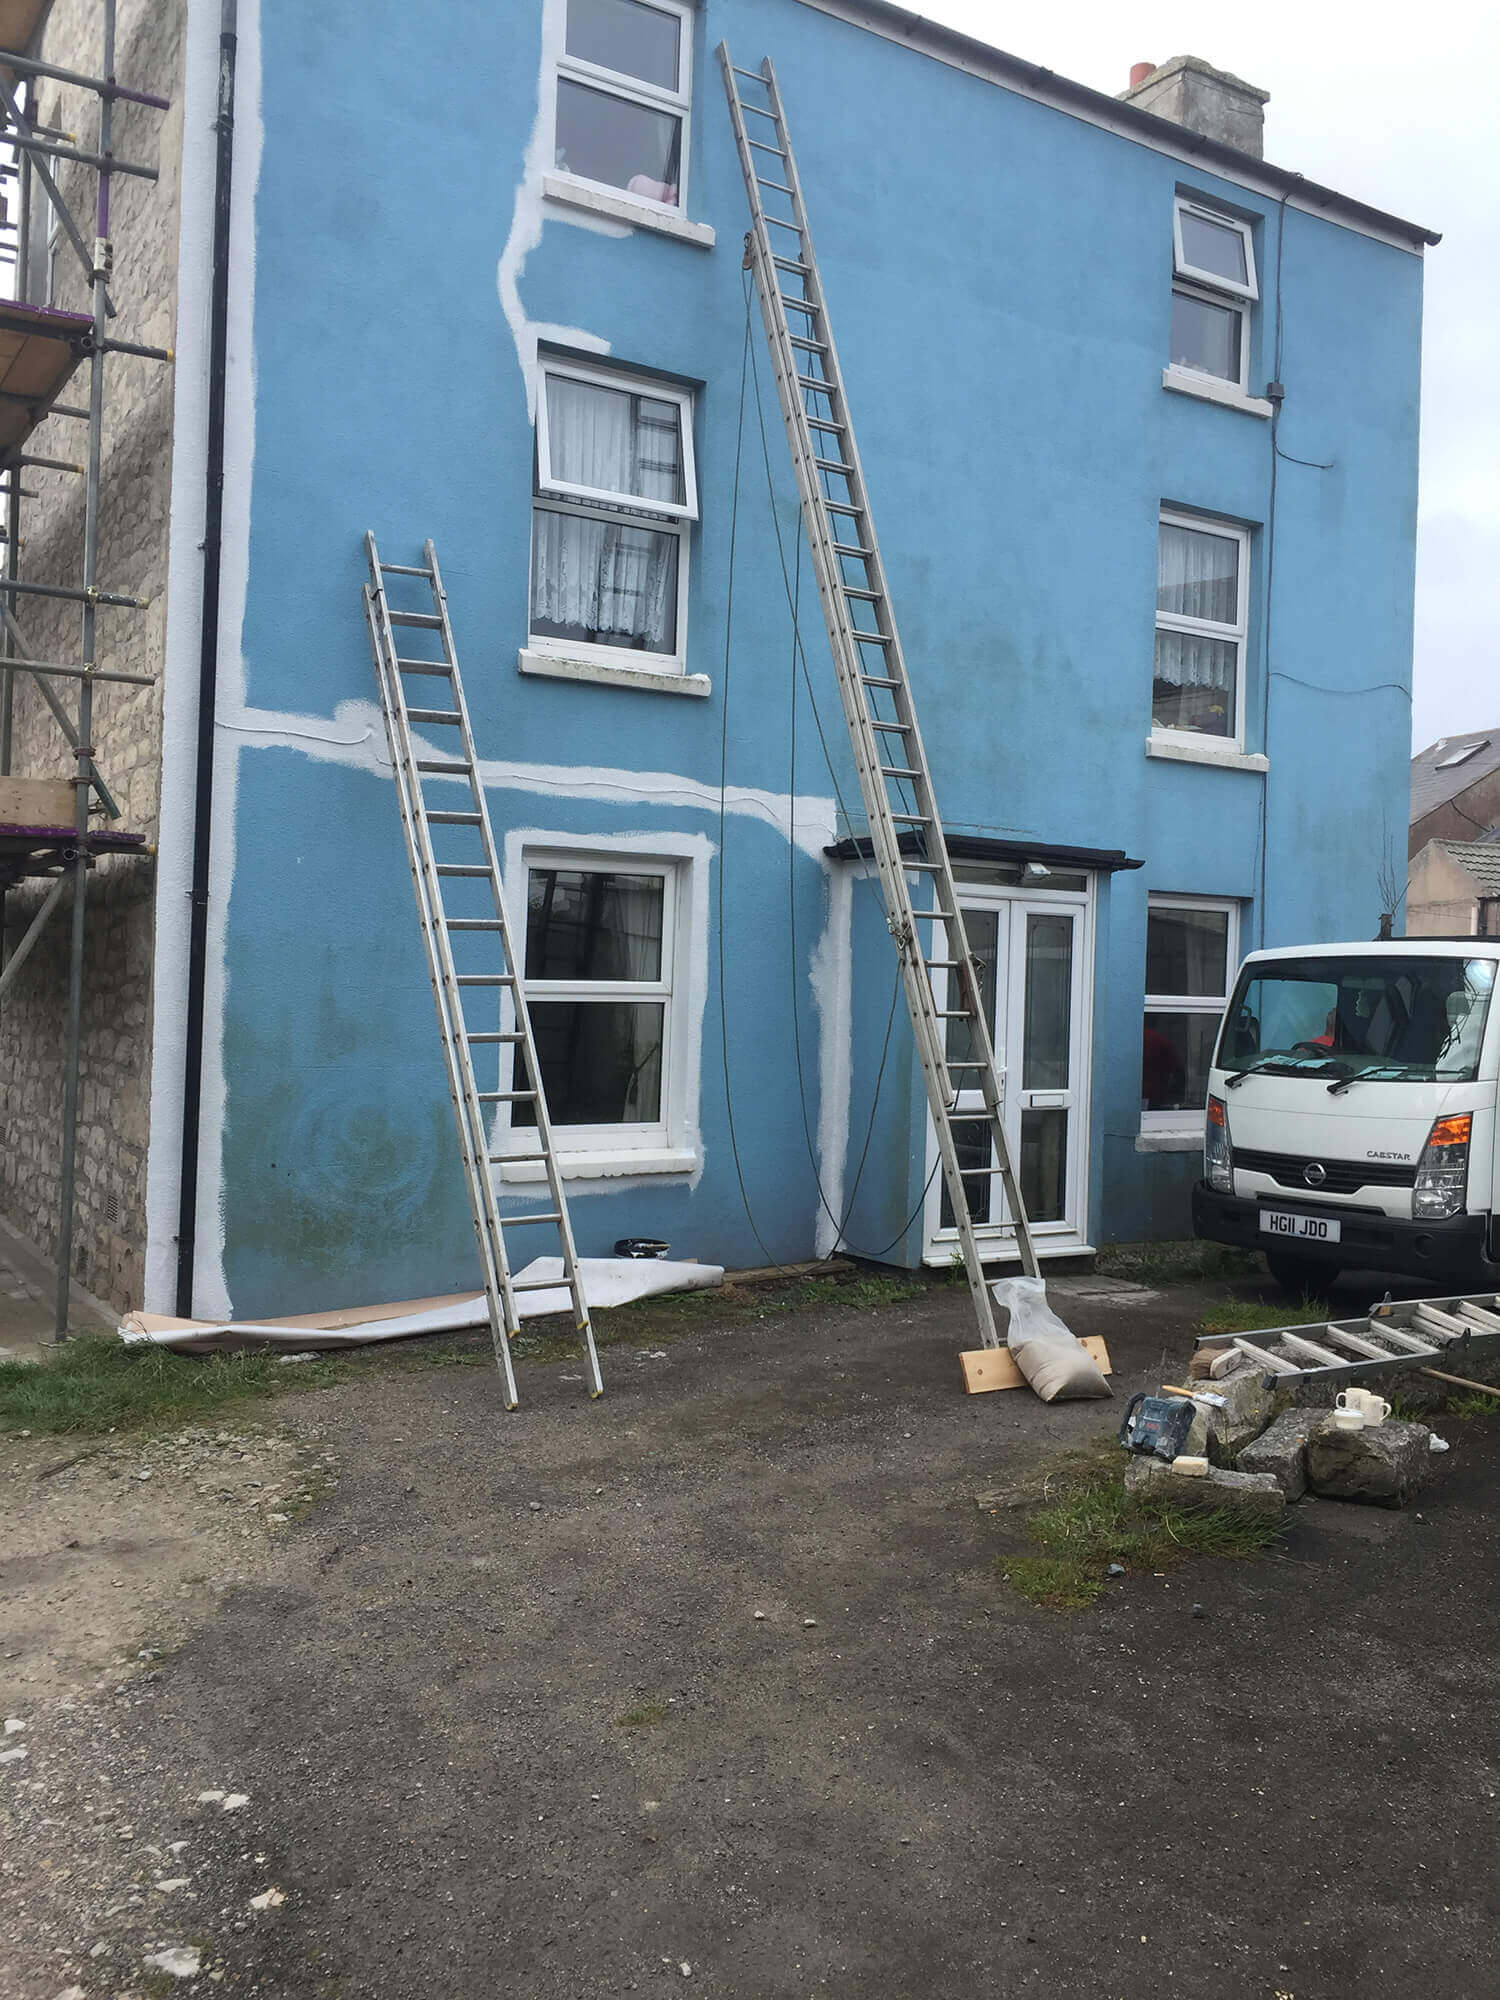 Blue house before being painted with scaffolding